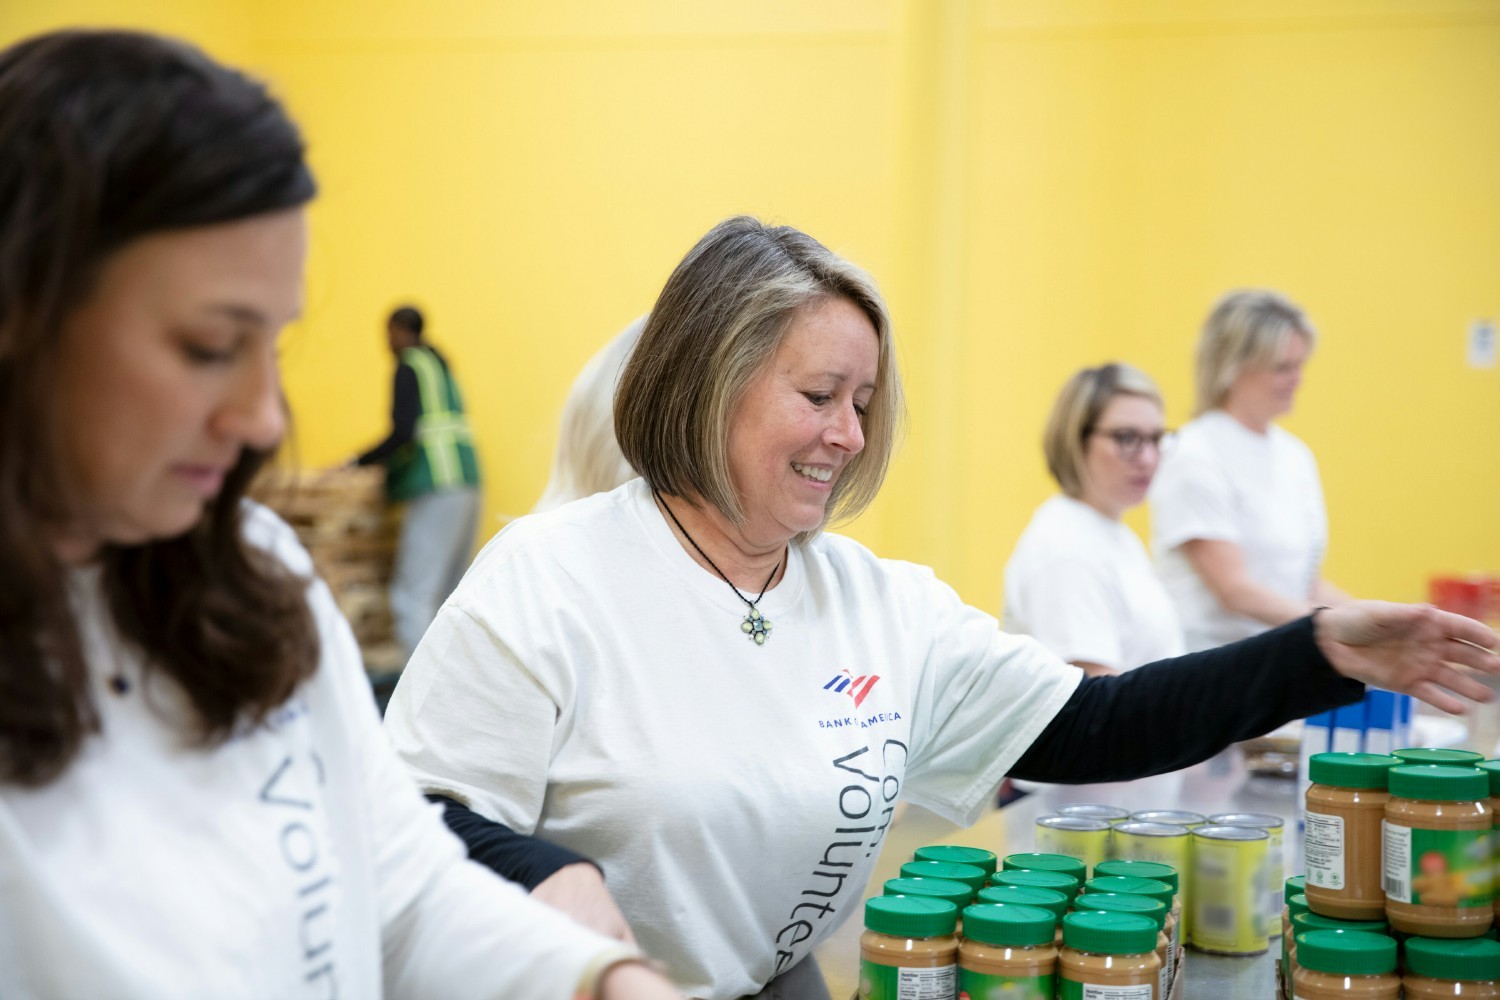 With paid volunteer time and events like Global Service Month, our teammates have the flexibility to give back.